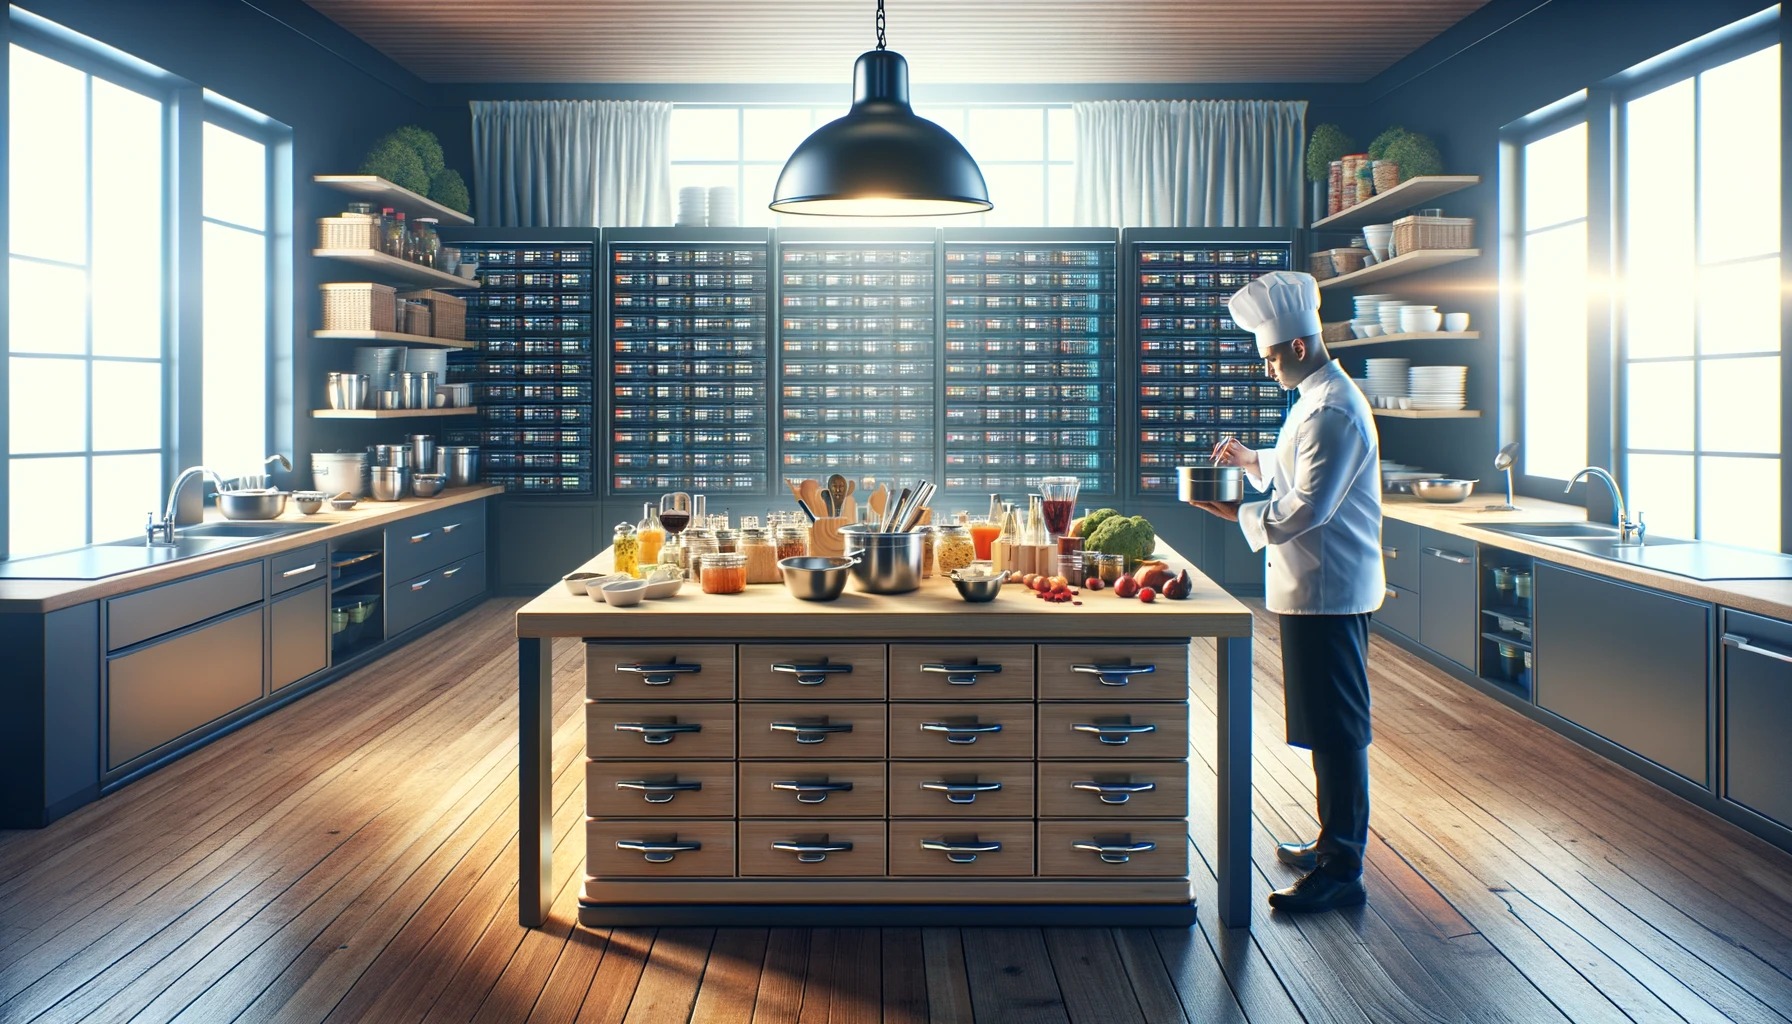 A single chef in a professional outfit organizes a large central table in a modern and sleek kitchen, symbolizing a fact table in data warehousing, captured in the high-quality style of a Canon 5D Mark IV camera.